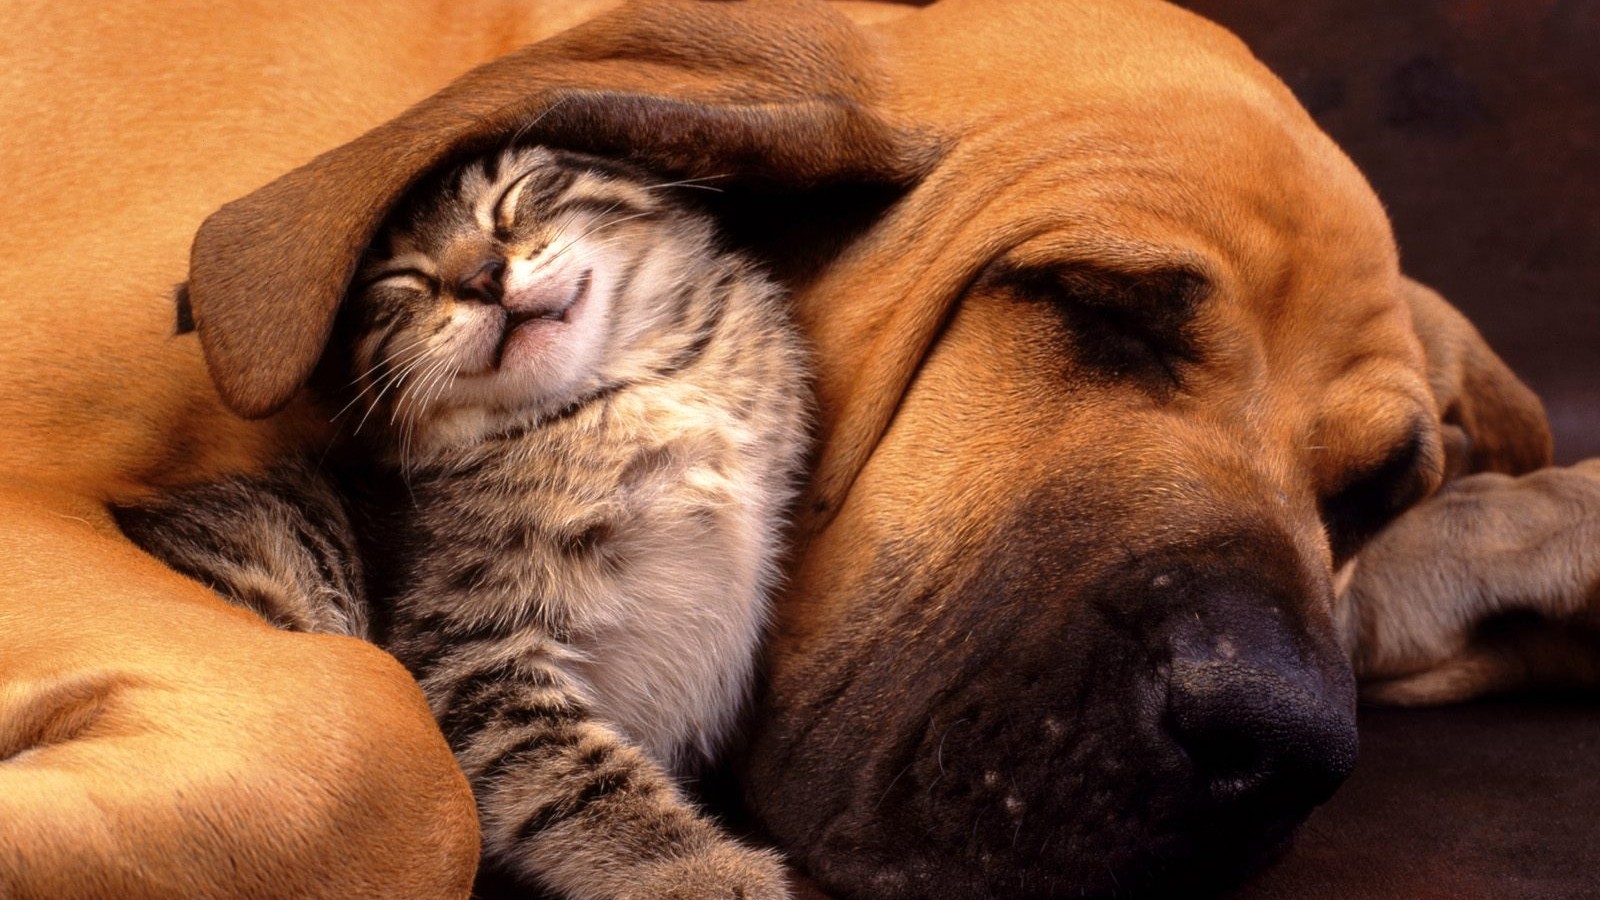 Playing Together Kitty Sleeping Under Puppys Ear Relationship is